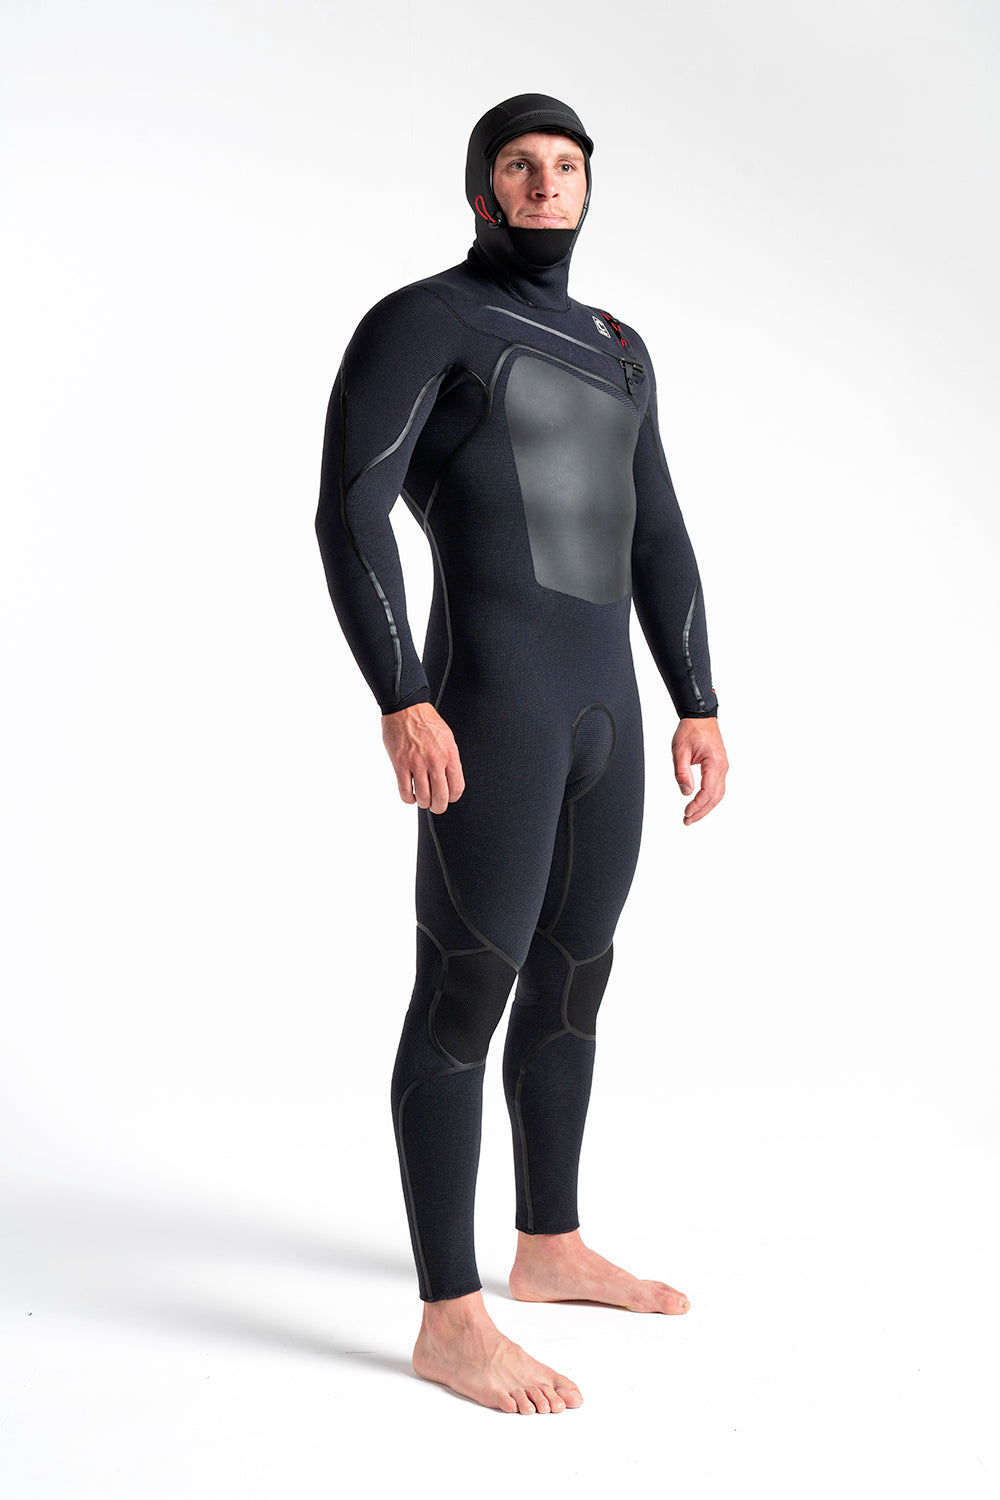 C-Skins Wired+ Plus 6:5 Mens LQS Hooded Steamer Winter Wetsuit